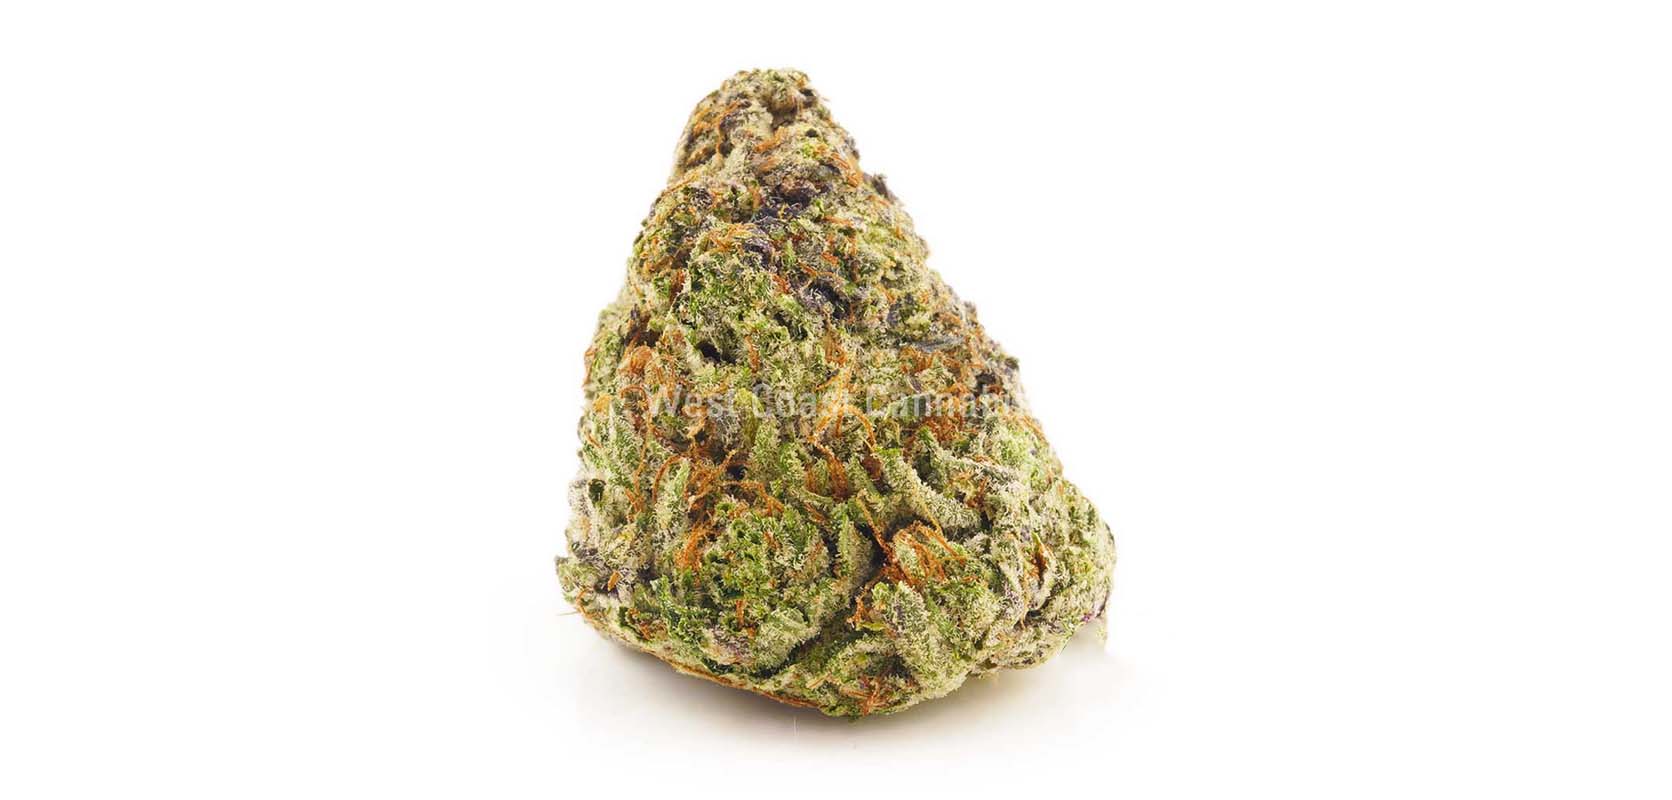 Watermelon Zkittlez budget buds for sale at online dispensary Canada for mail order marijuana & weed online Canada. Buy weed.